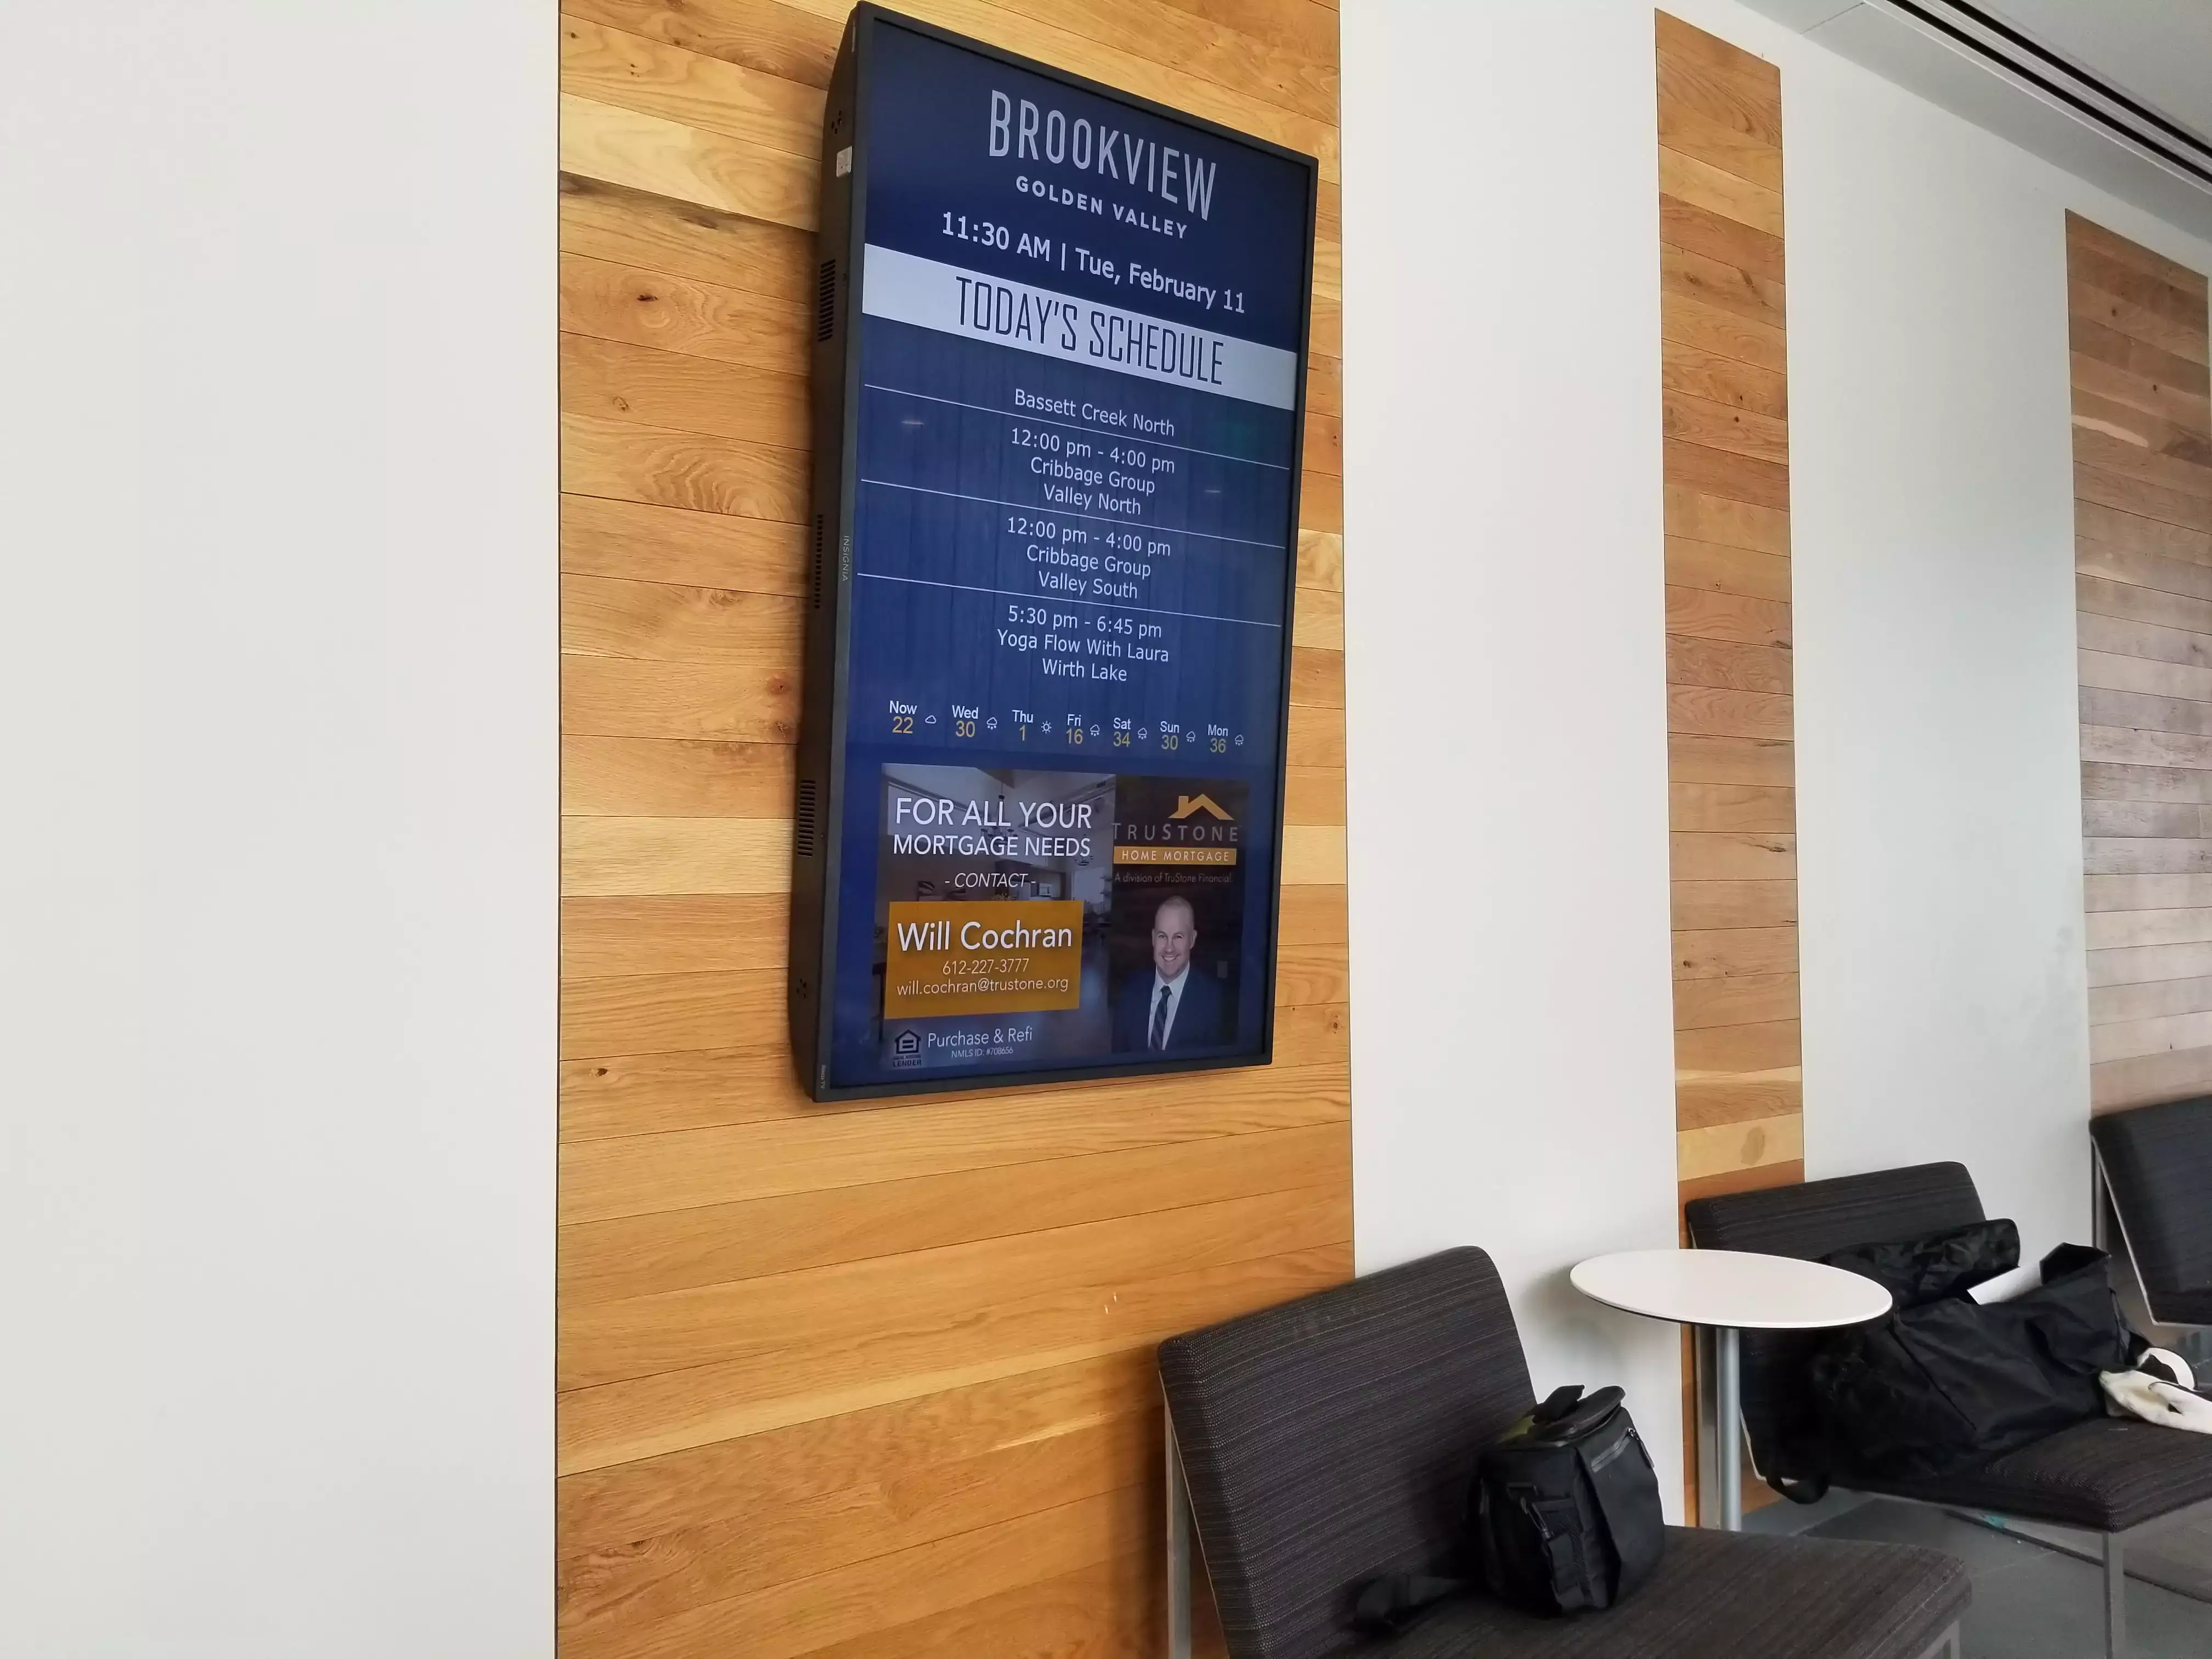 Blue lobby digital signage displaying the daily schedule for Brookview Golden Valley